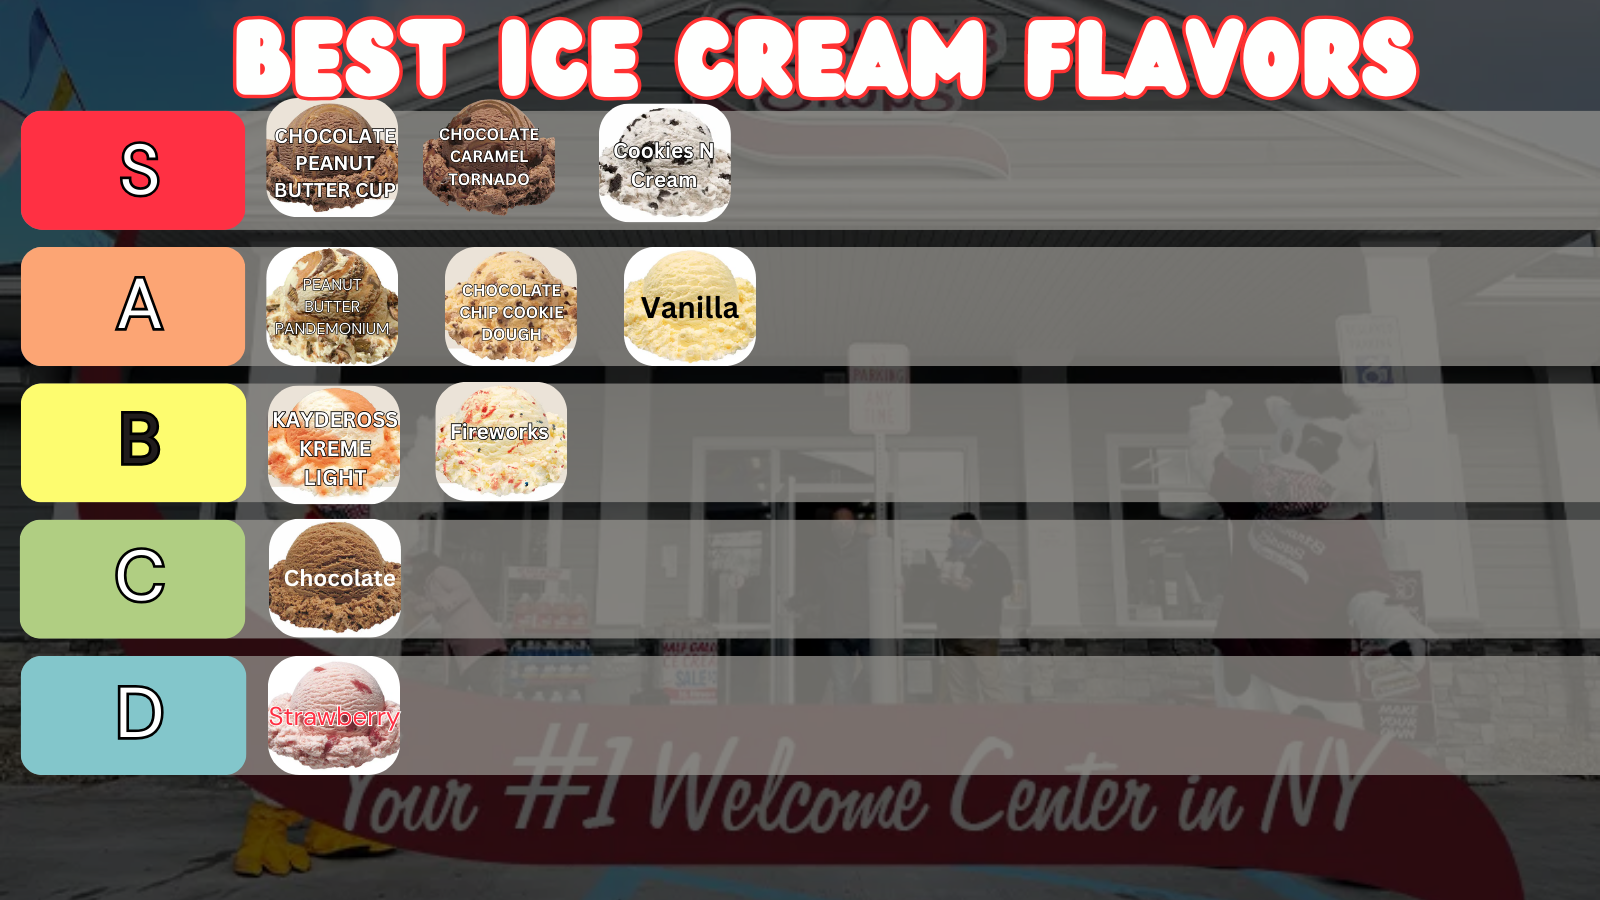 In this episode of the Windbag Whispers, the hosts and their guest rank the top 10 best ice cream flavors from Stewart's. They use a tier system, with S tier being the best and D tier being the worst. The flavors discussed include Fireworks, Cateras Cream Light, Chocolate Peanut Butter Cup, Chocolate Caramel Tornado, Chocolate Chip Cookie Dough, Peanut Butter Pandemonium, Strawberry, Chocolate, and Vanilla. The hosts have different opinions on the rankings, but they ultimately come to a consensus.